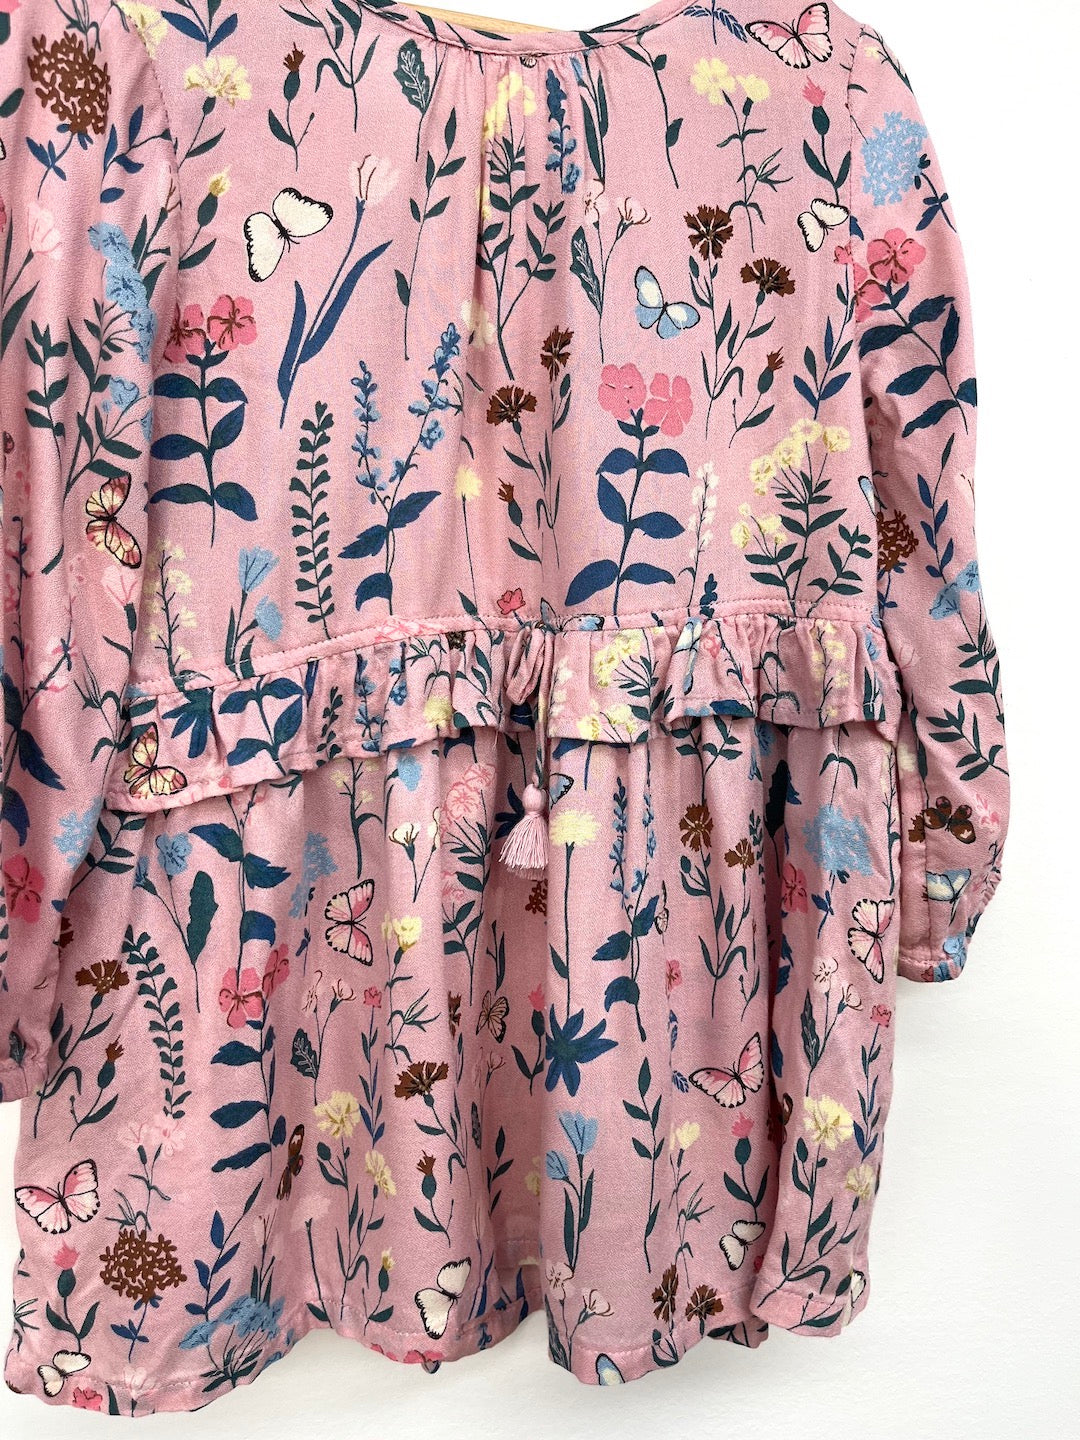 h&m pink floral ruffle dress 4T